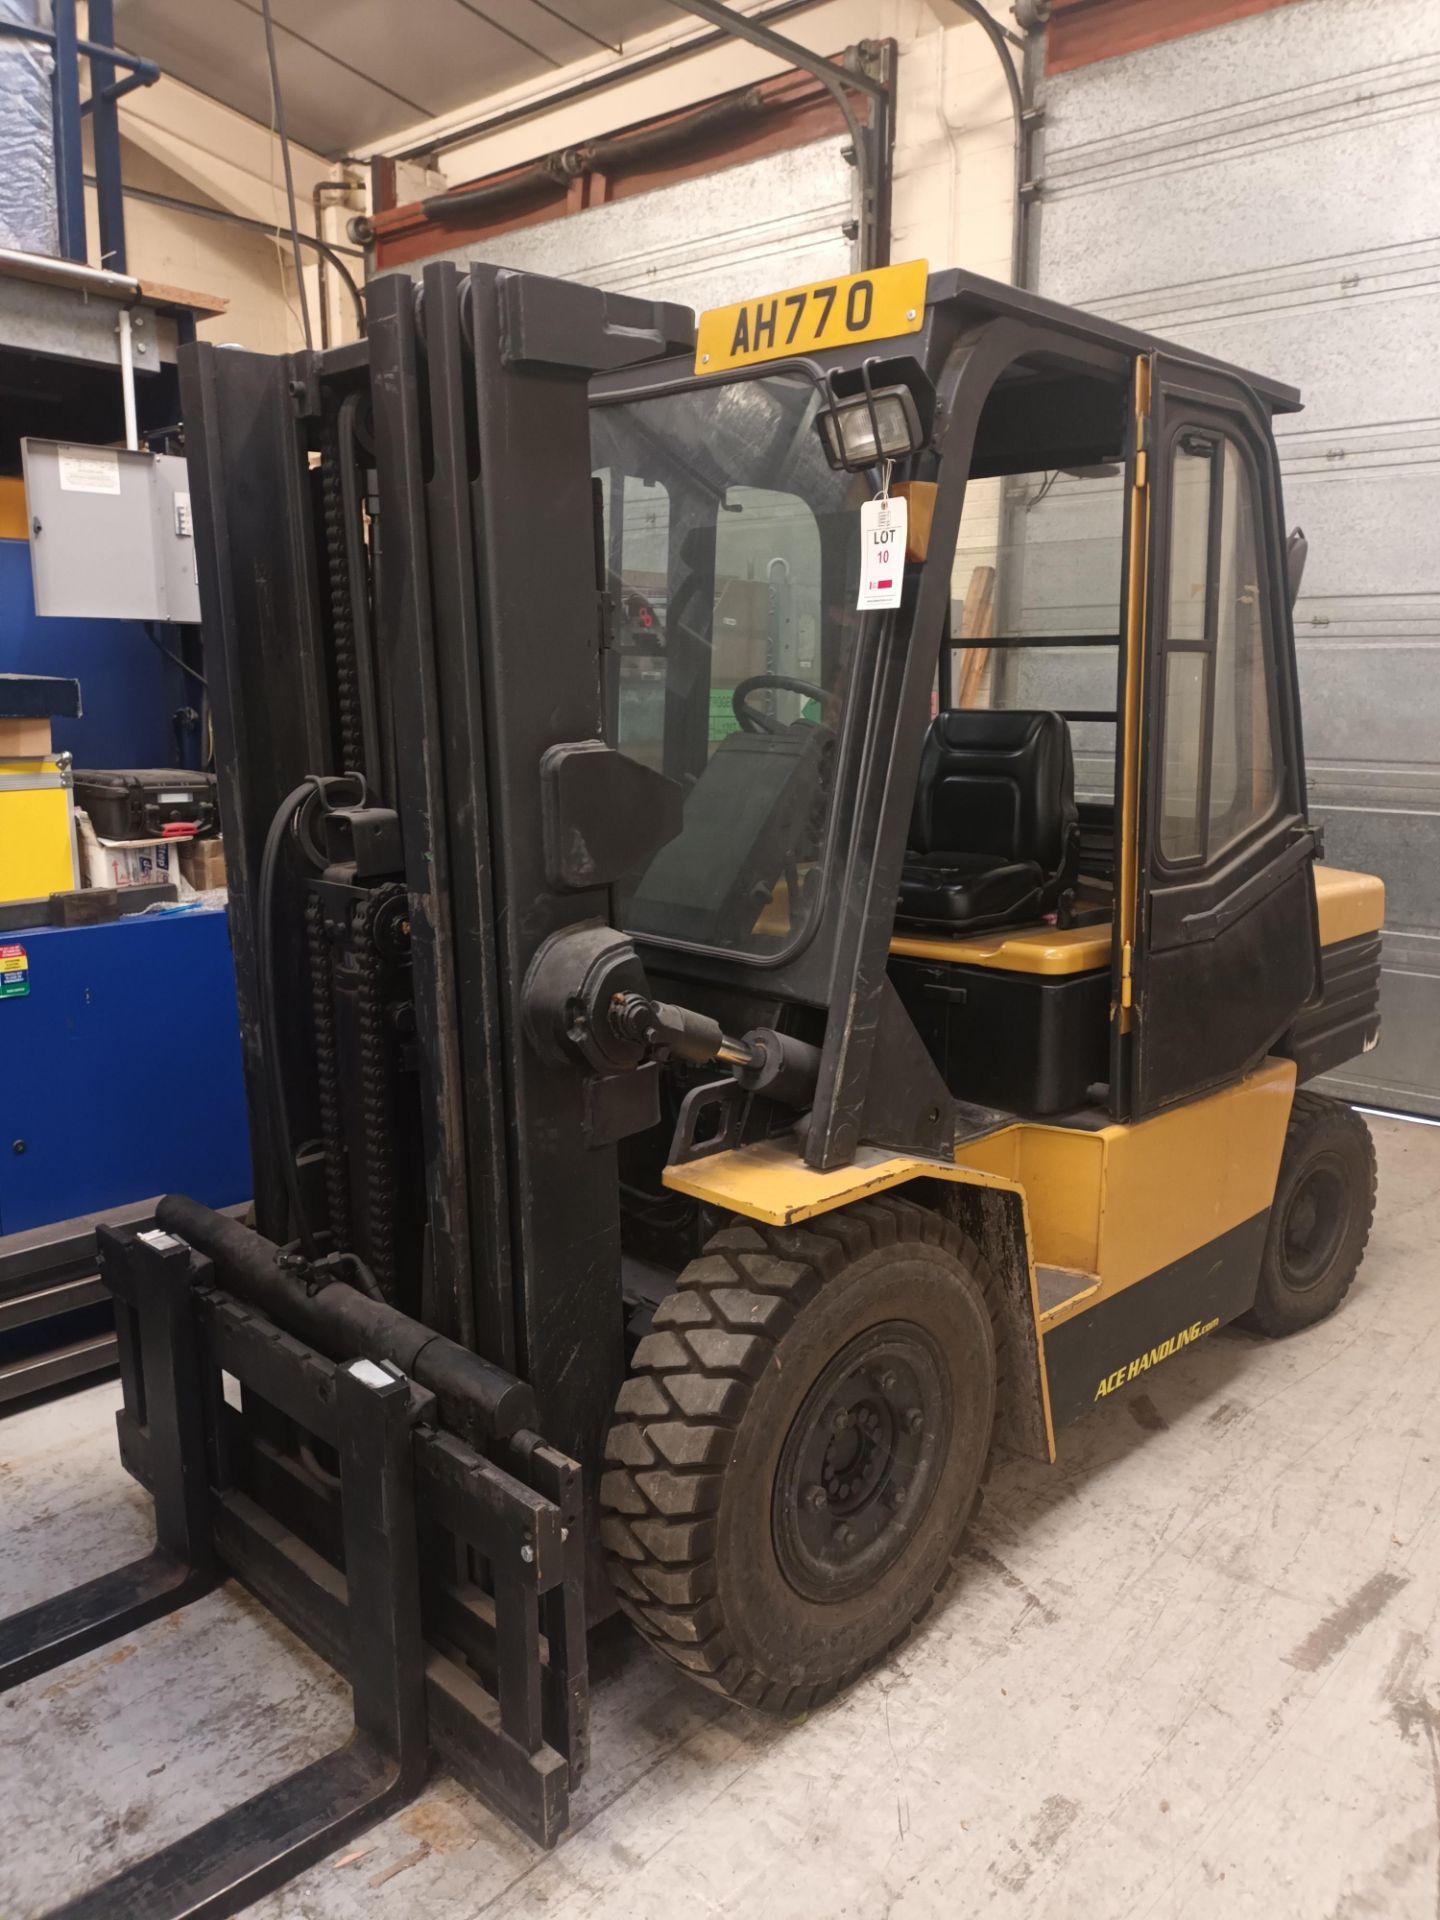 Daewoo 0355 diesel forklift truck with side shift, 2200 mast height, 4t capacity witih fork - Image 2 of 4